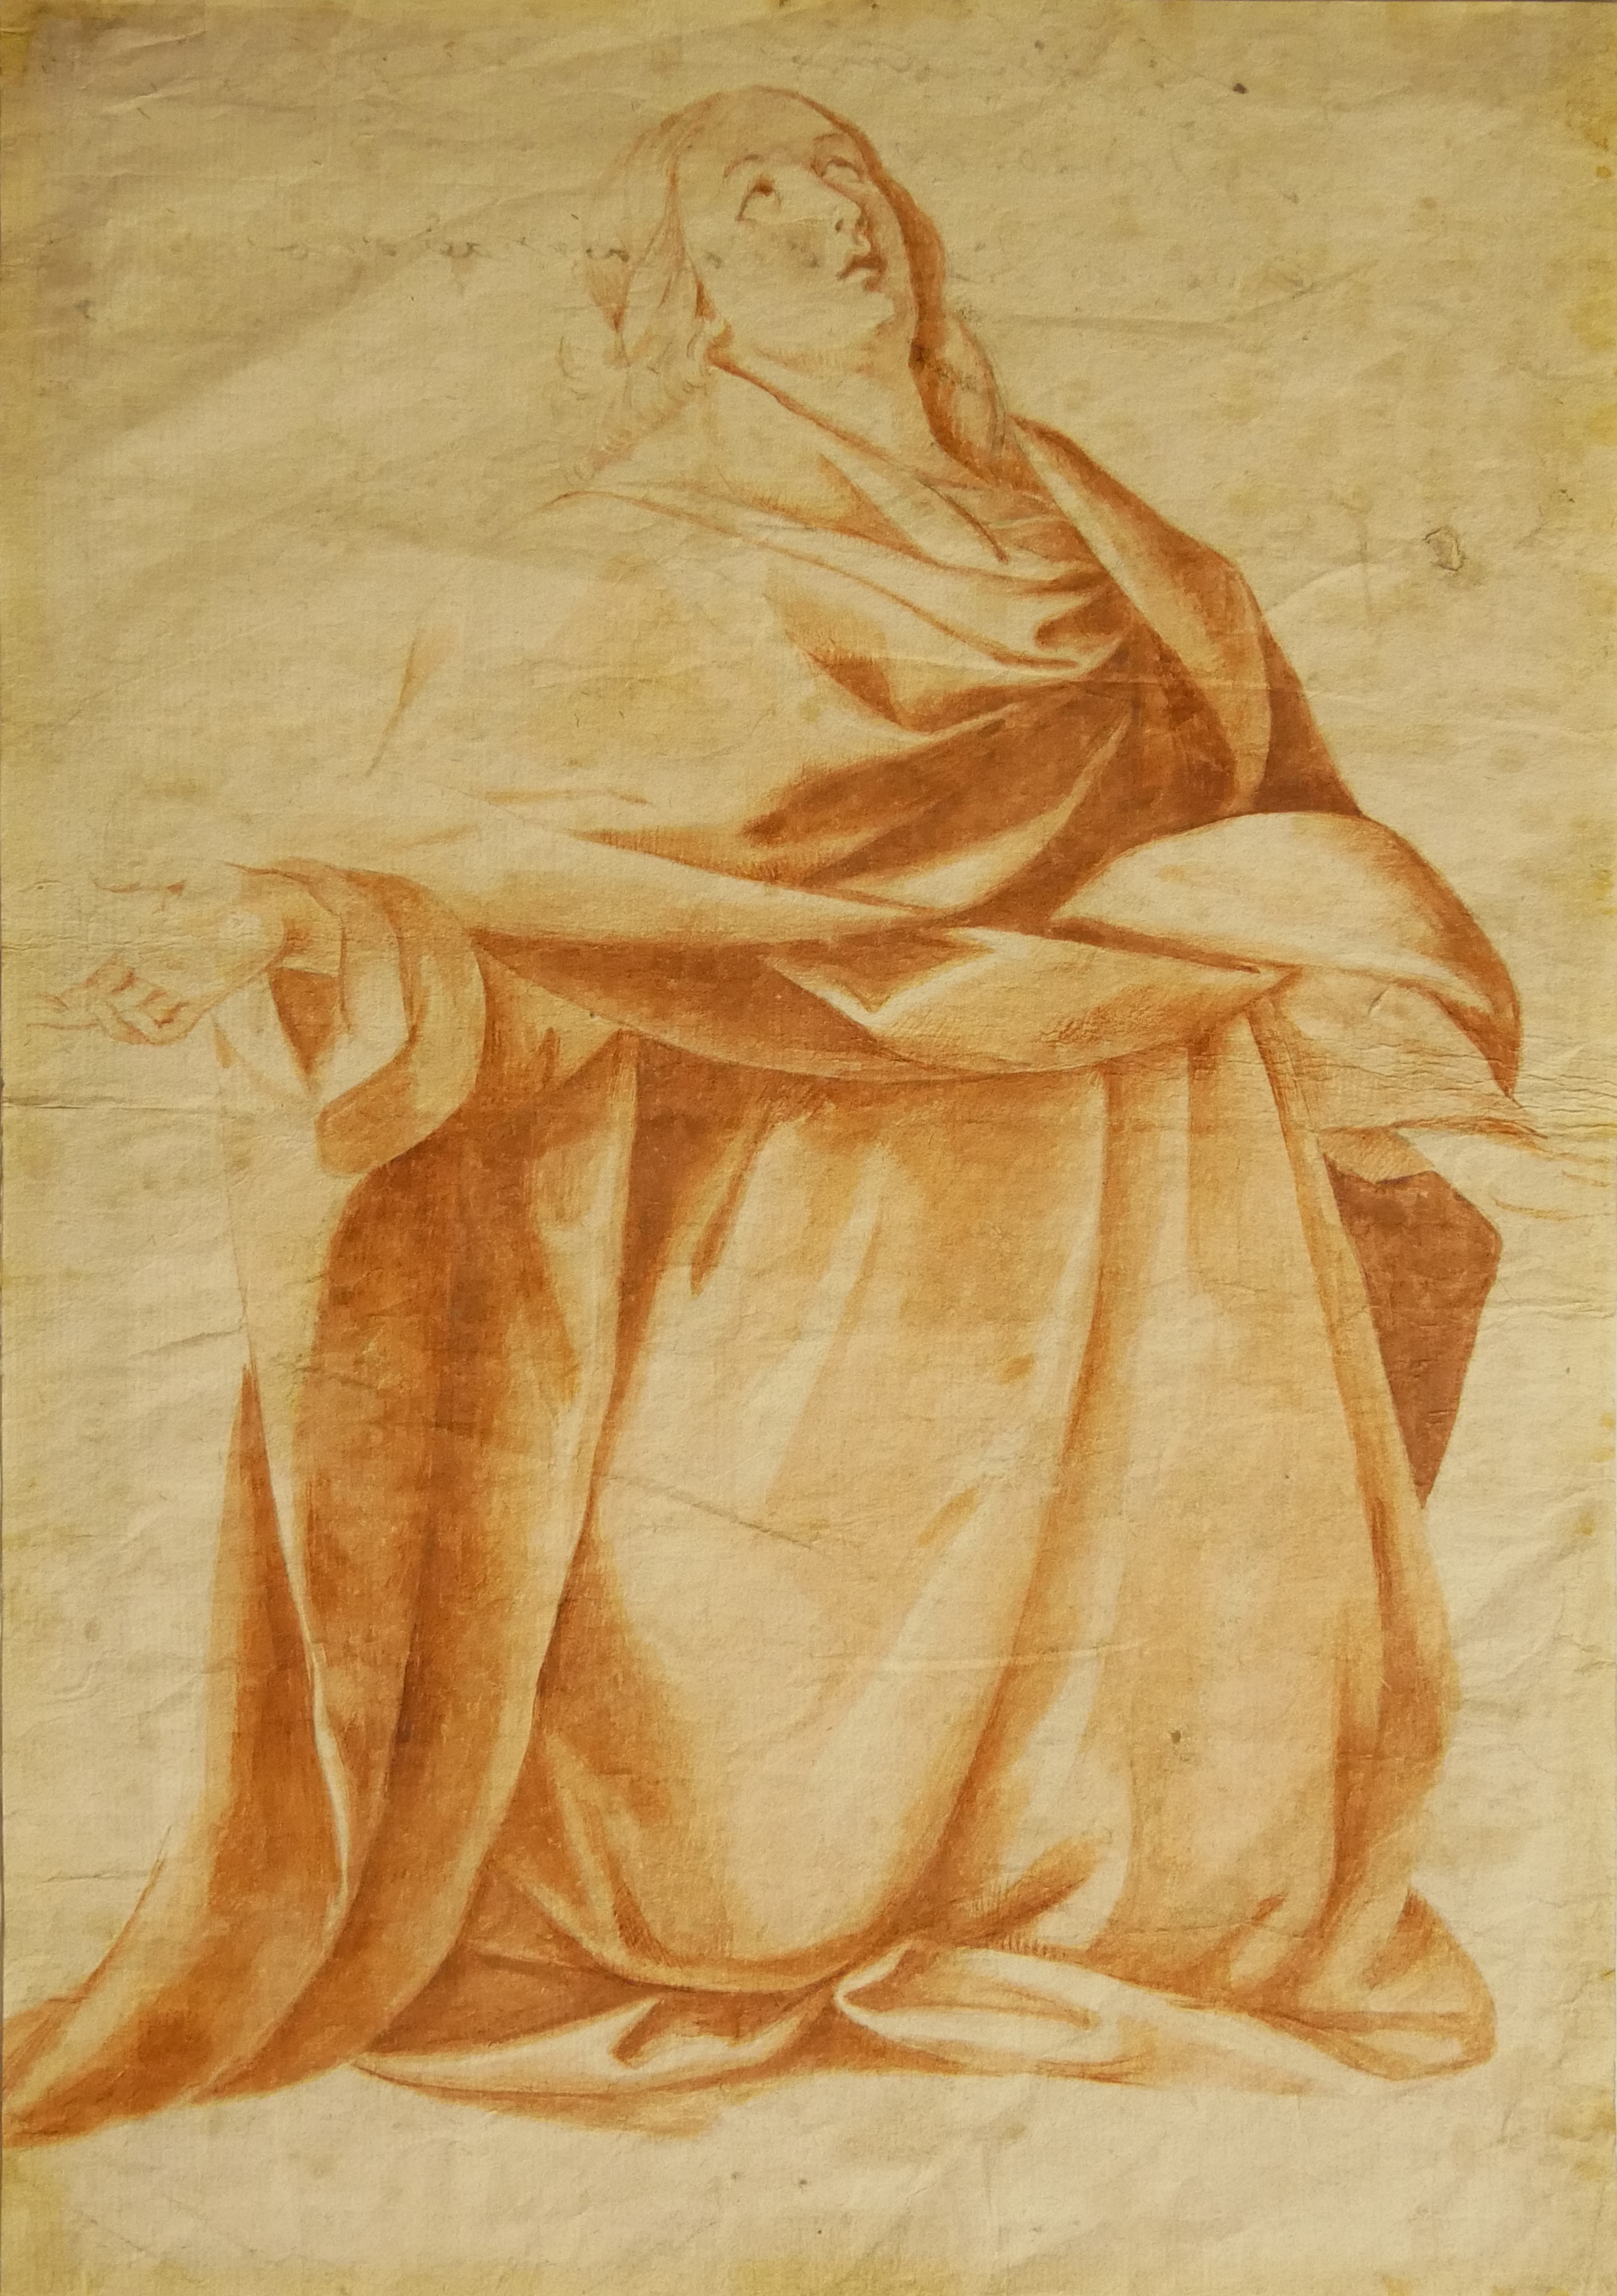 A 17TH CENTURY ITALIAN DRAWING Madonna wearing draped robe kneeling gazing into the heavens with